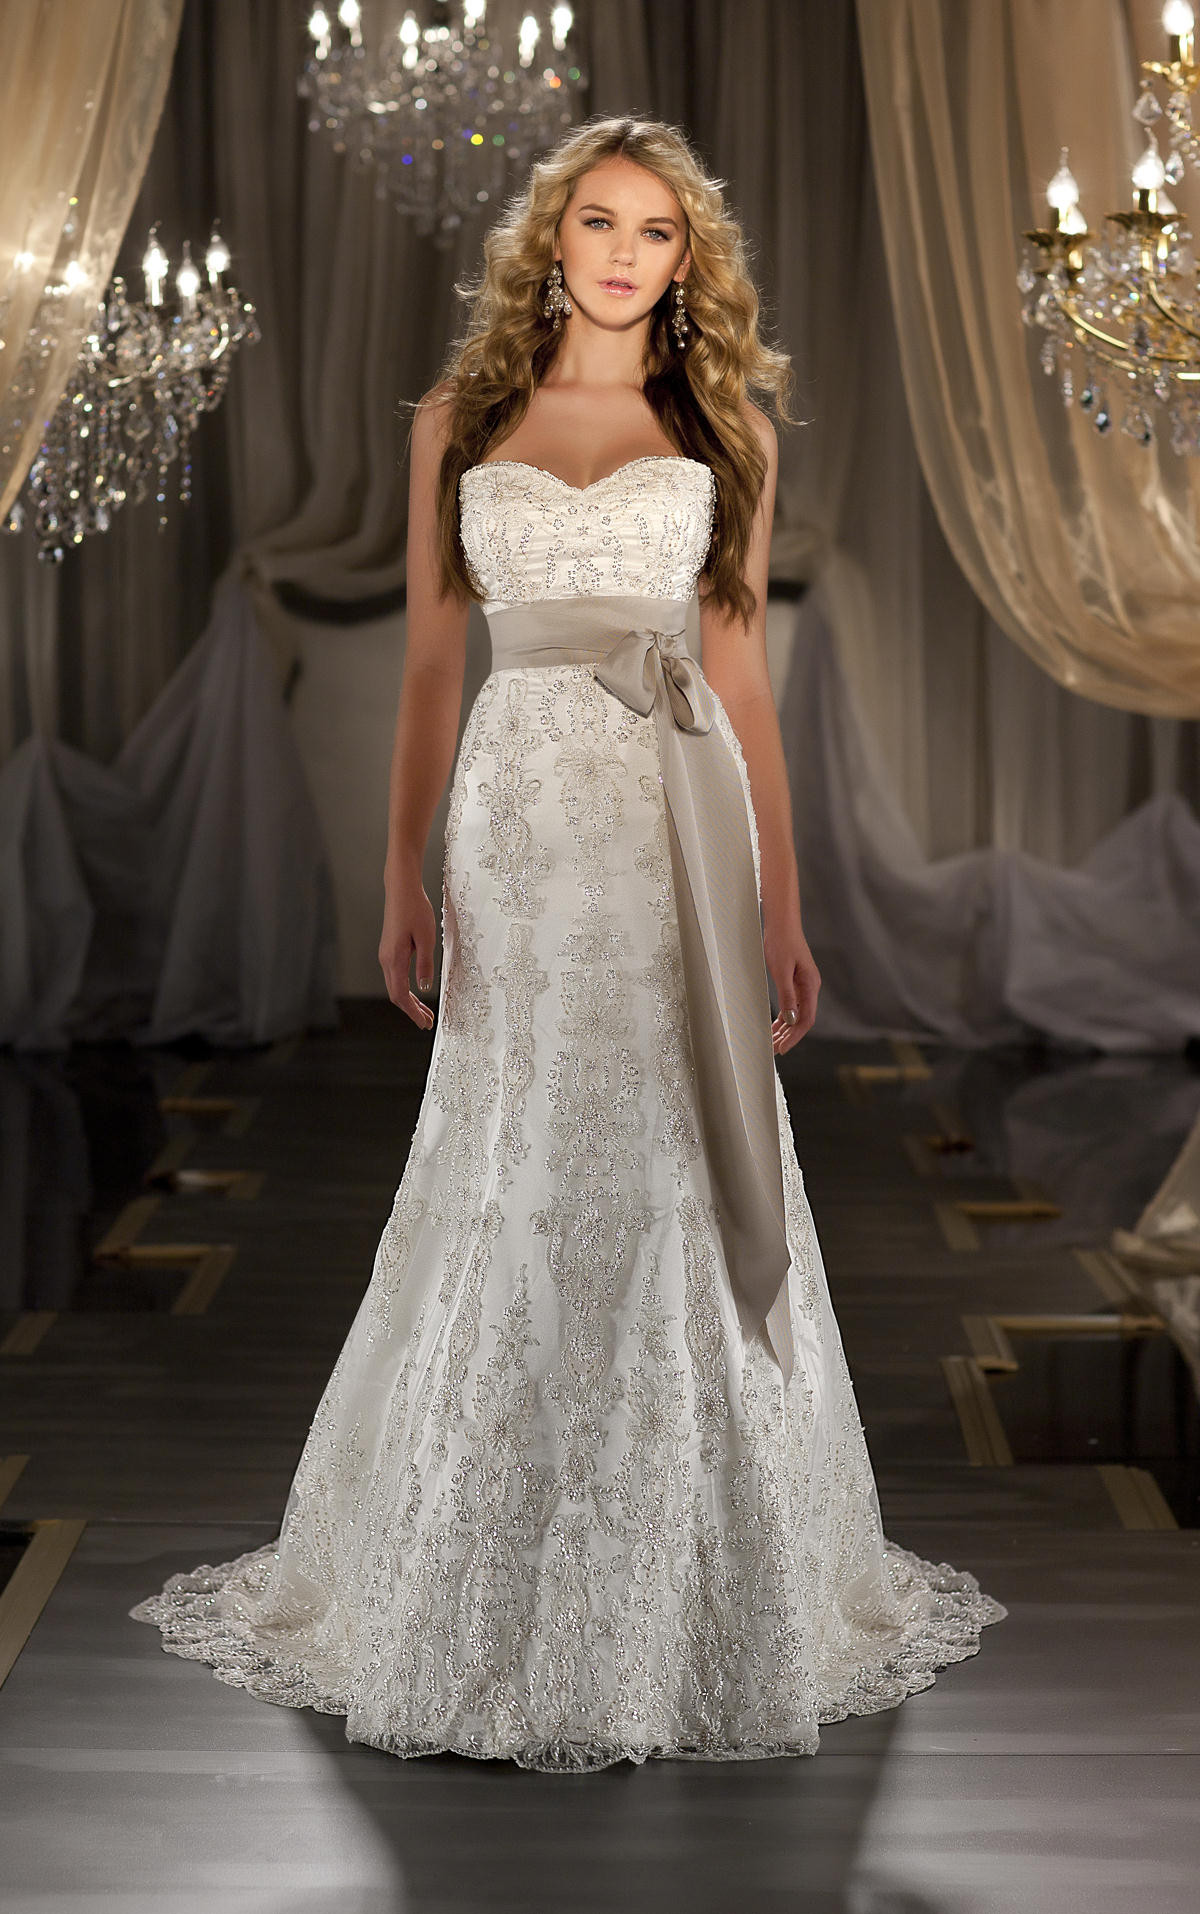 Sweetheart Wedding Gowns
 YOUR NECKLINE